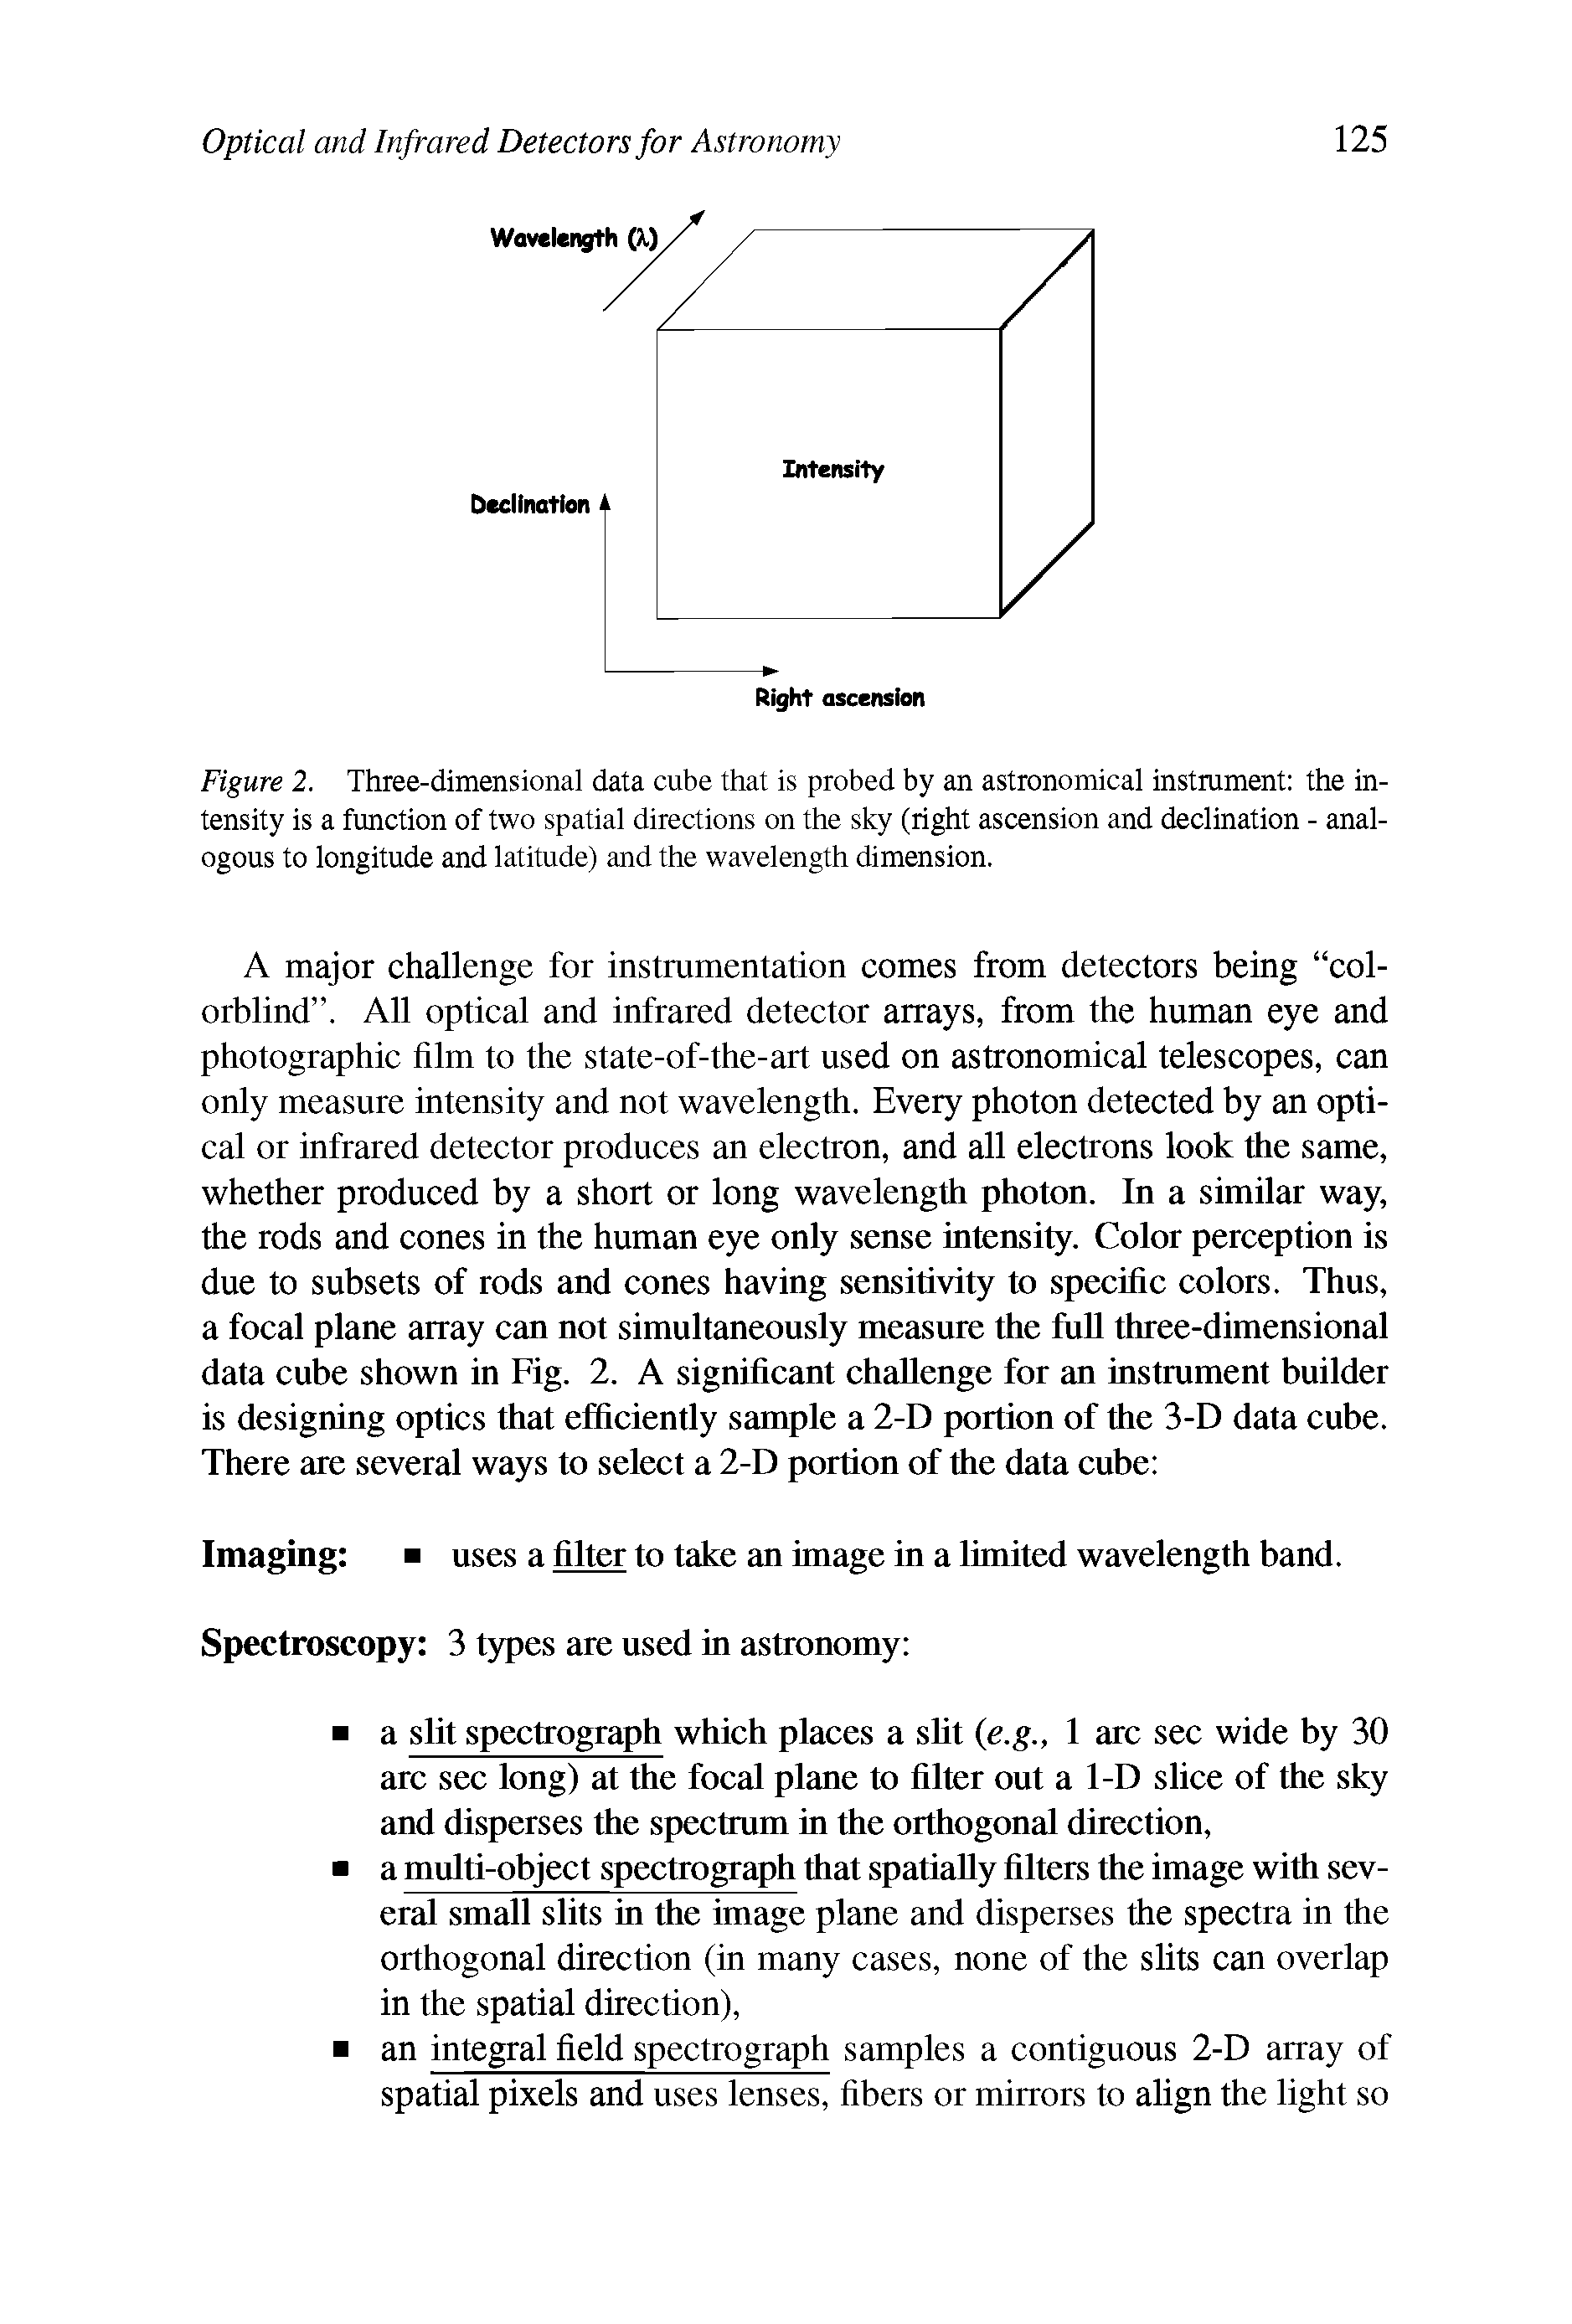 Figure 2. Three-dimensional data cube that is probed by an astronomical instmment the intensity is a function of two spatial directions on the sky (right ascension and declination - analogous to longitude and latitude) and the wavelength dimension.